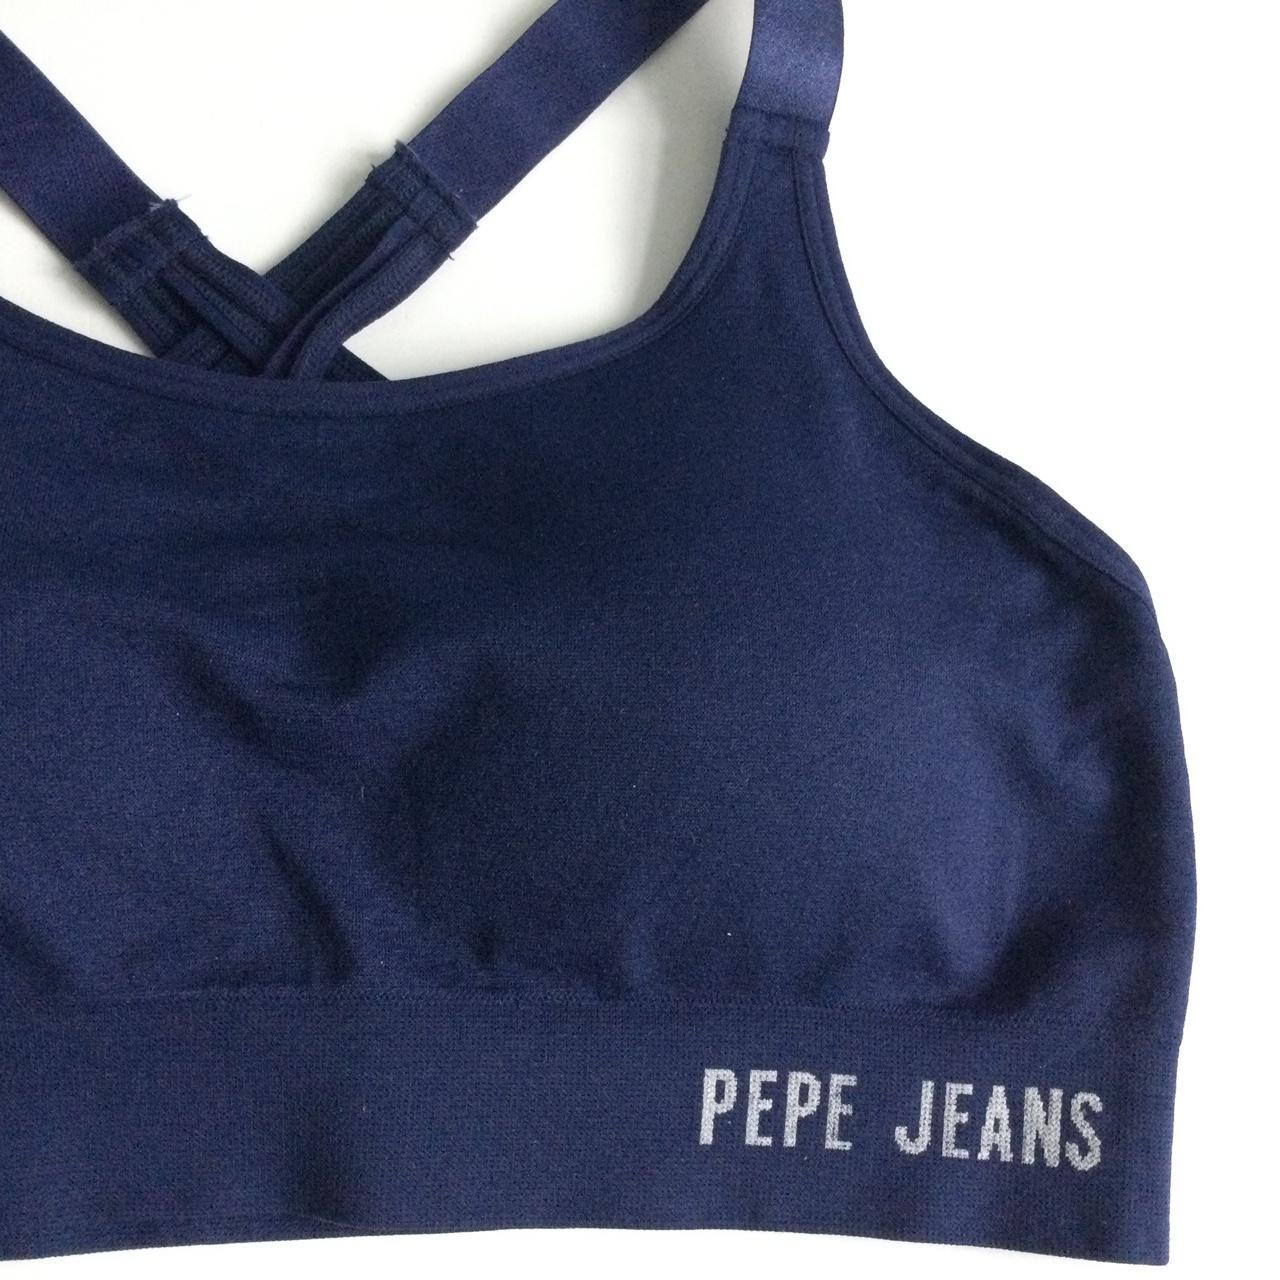 Pepe Jeans seamless bra in navy